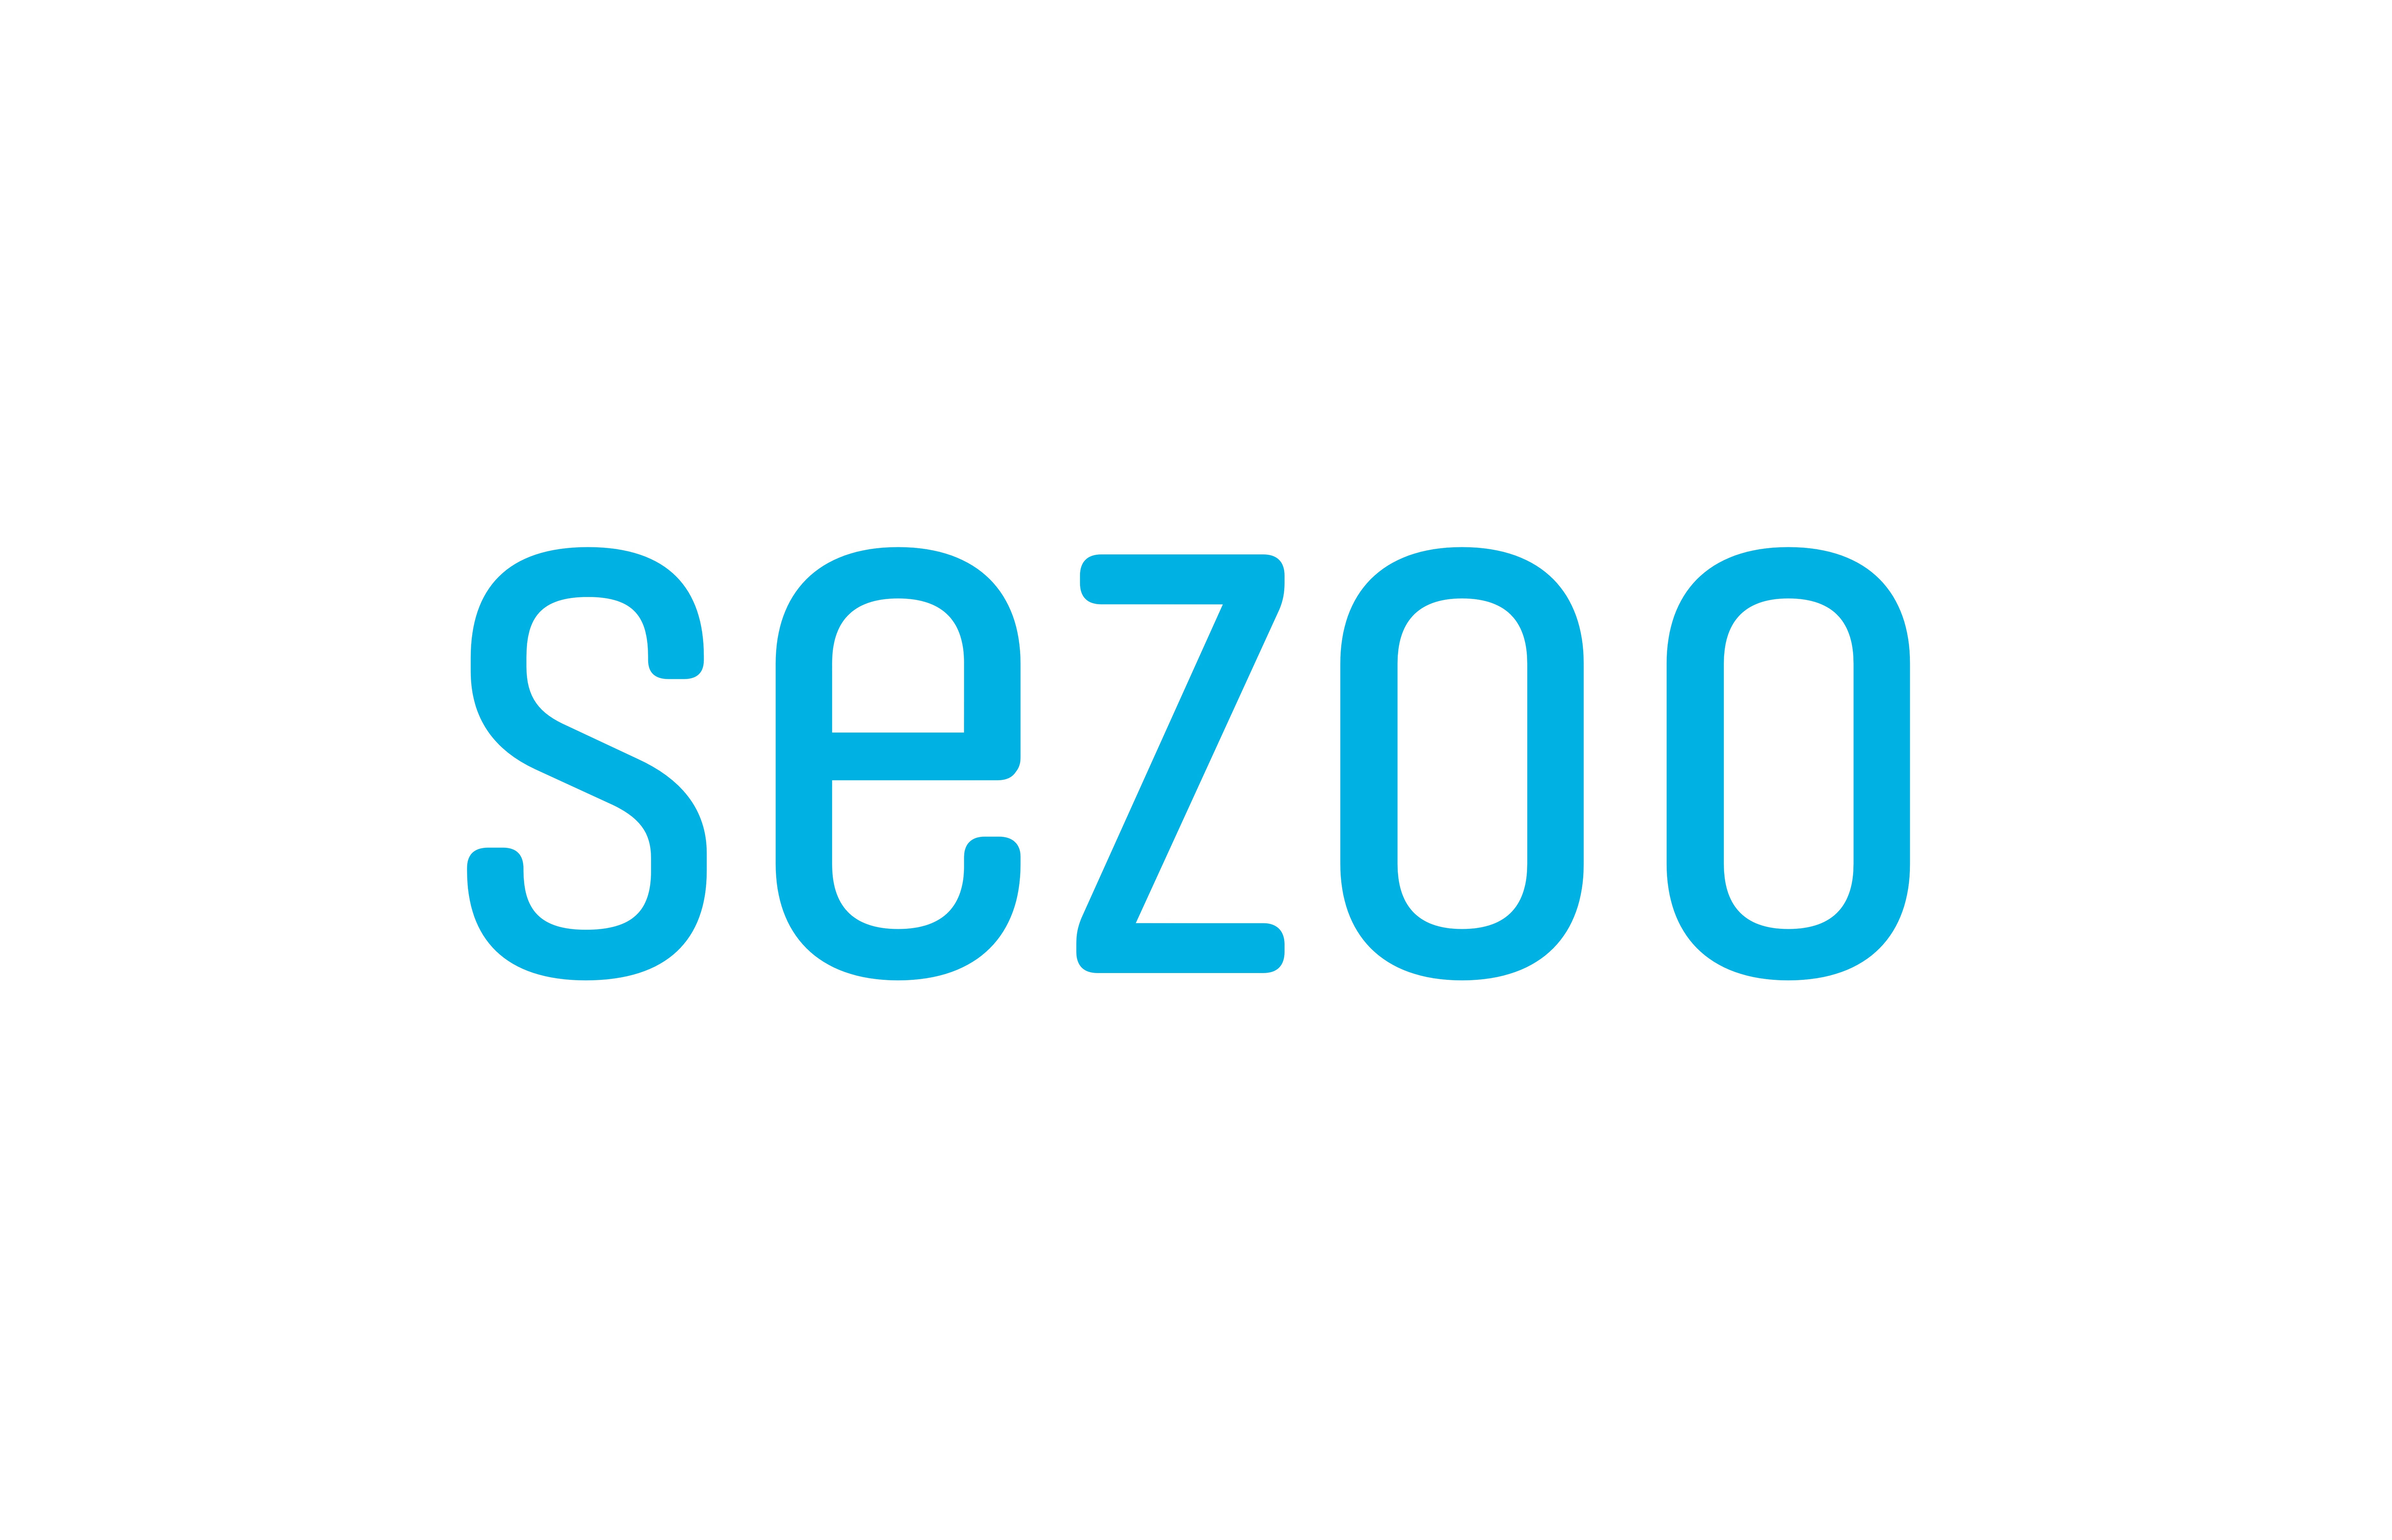 Sezoo logo - clearly very large